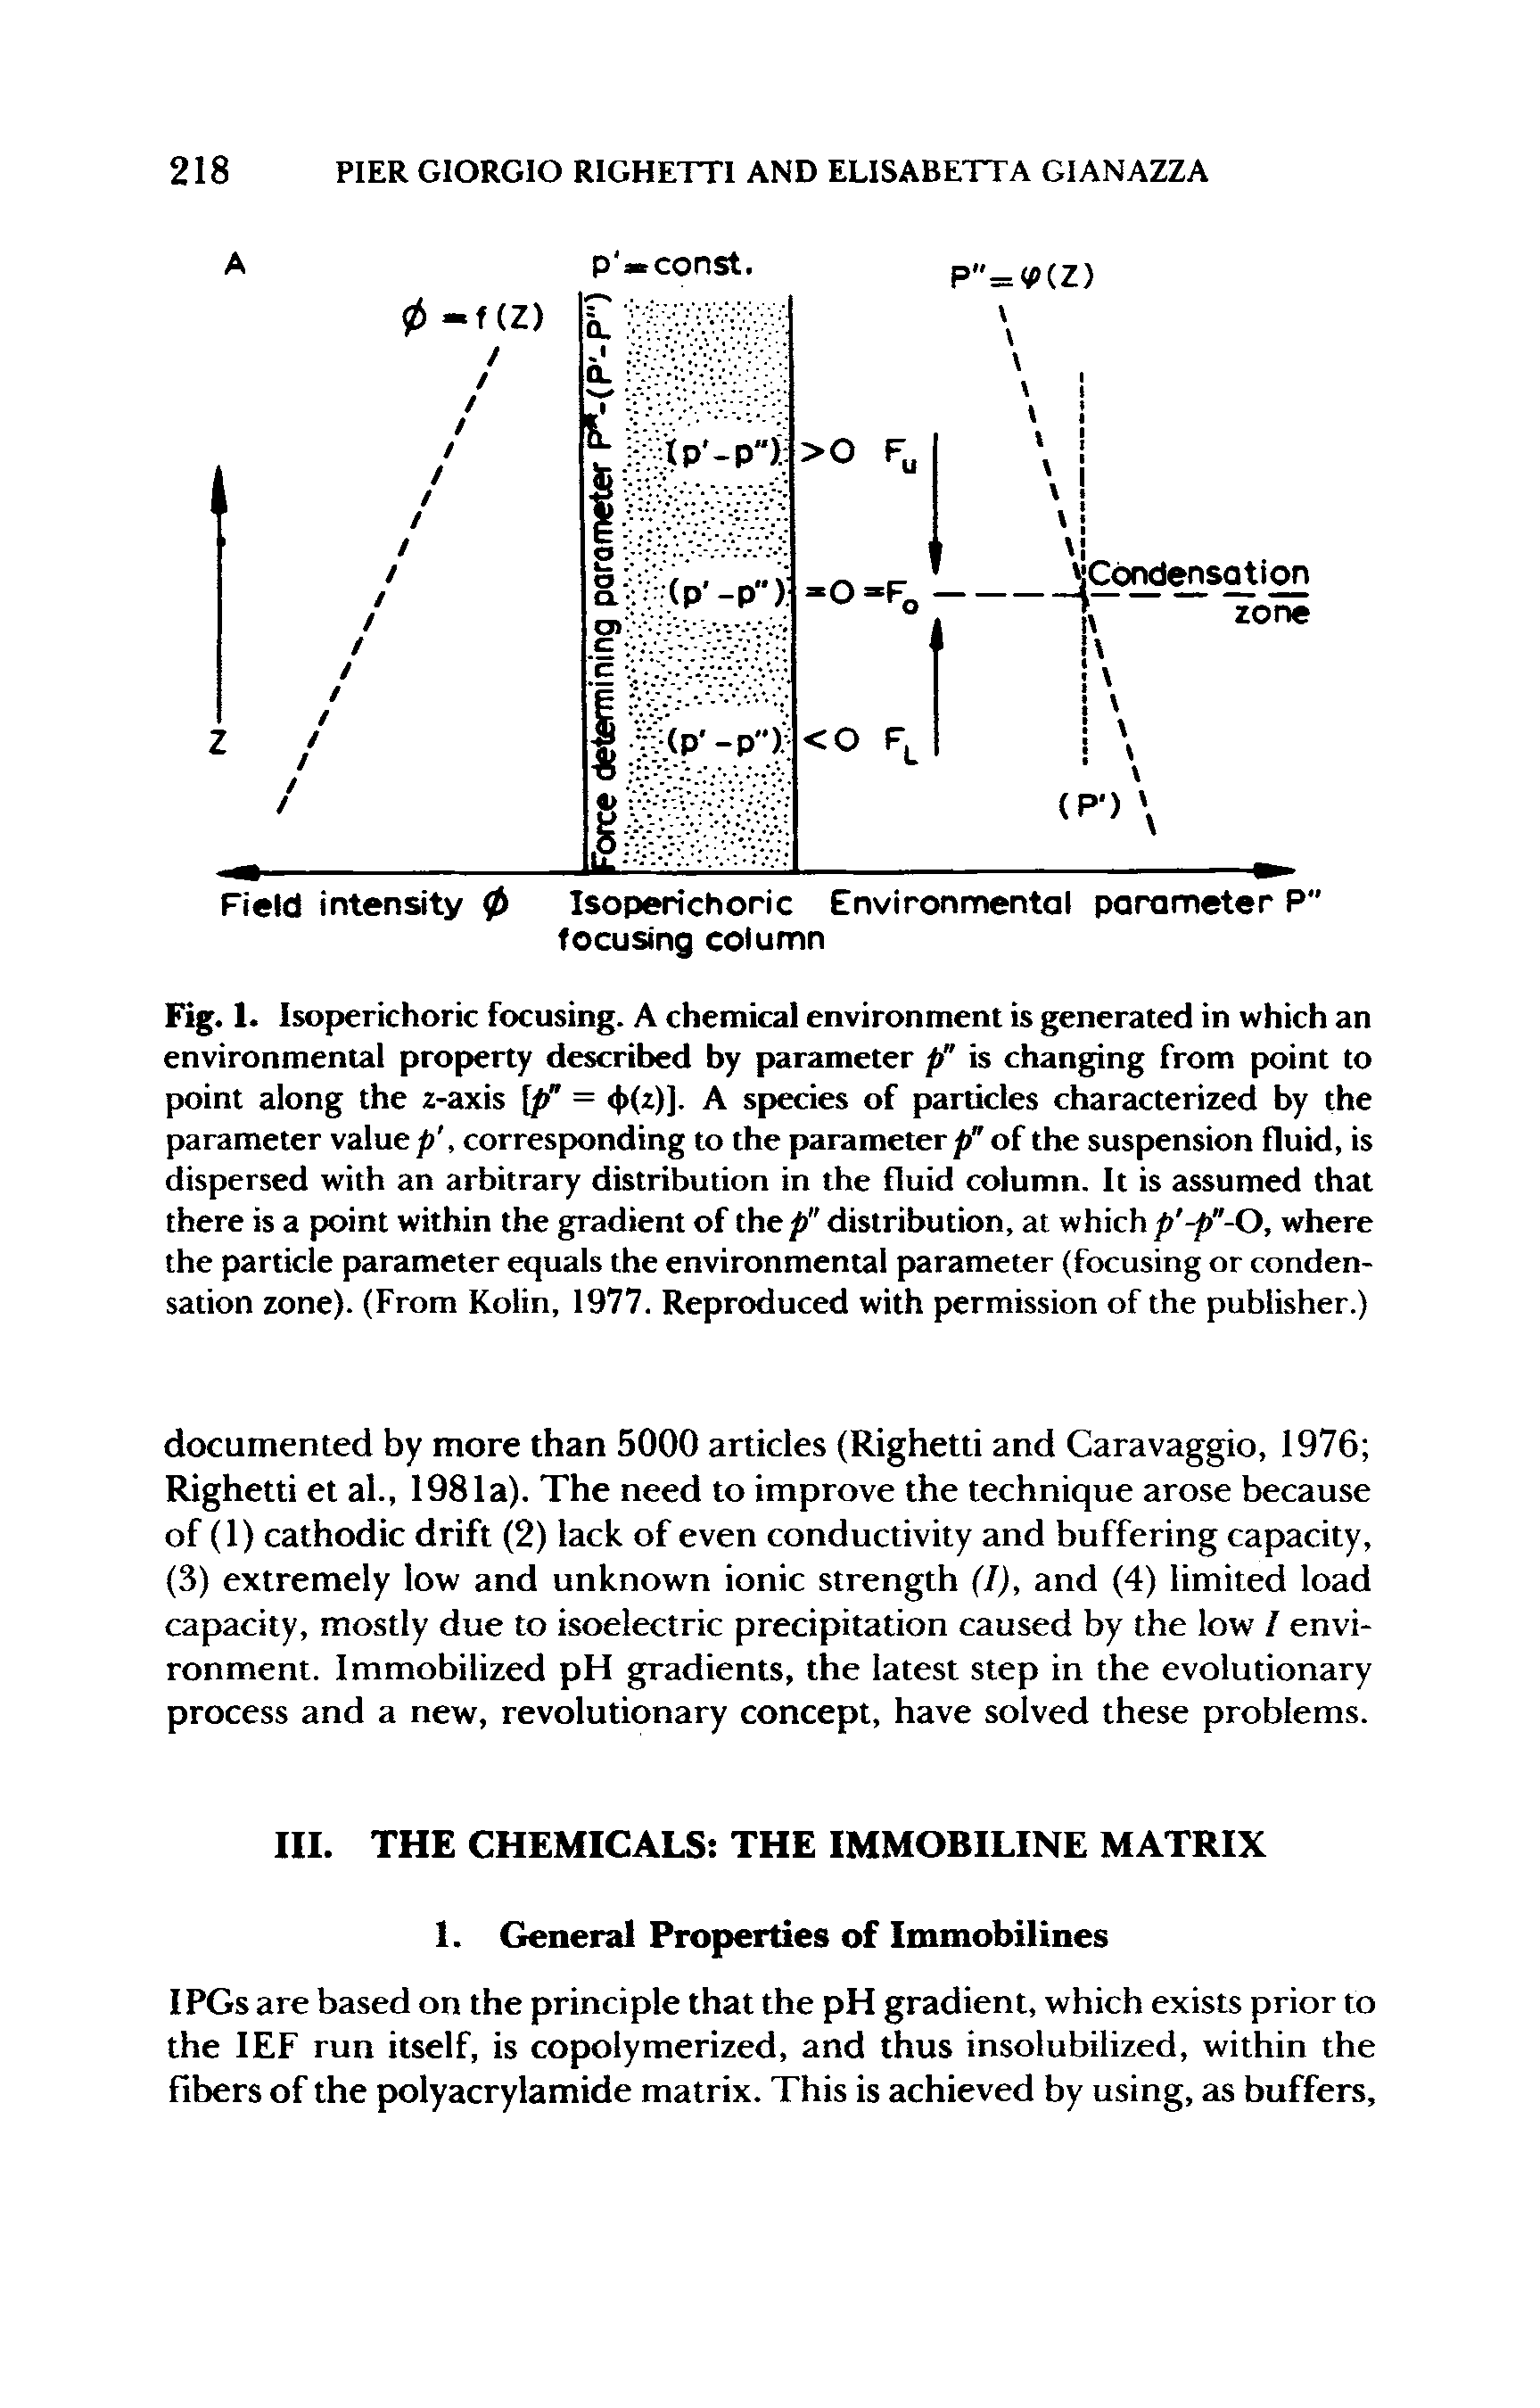 Fig. 1. Isopjerichoric focusing. A chemical environment is generated in which an environmental property described by parameter p" is changing from point to point along the z-axis p" = <t>(z)]. A species of particles characterized by the parameter value/), corresfxtnding to the parameter/>" of the suspension fluid, is dispersed with an arbitrary distribution in the fluid column. It is assumed that there is a X>int within the gradient of the p" distribution, at which p -p"-0, where the particle parameter equals the environmental parameter (focusing or condensation zone). (From Kolin, 1977. Reproduced with permission of the publisher.)...